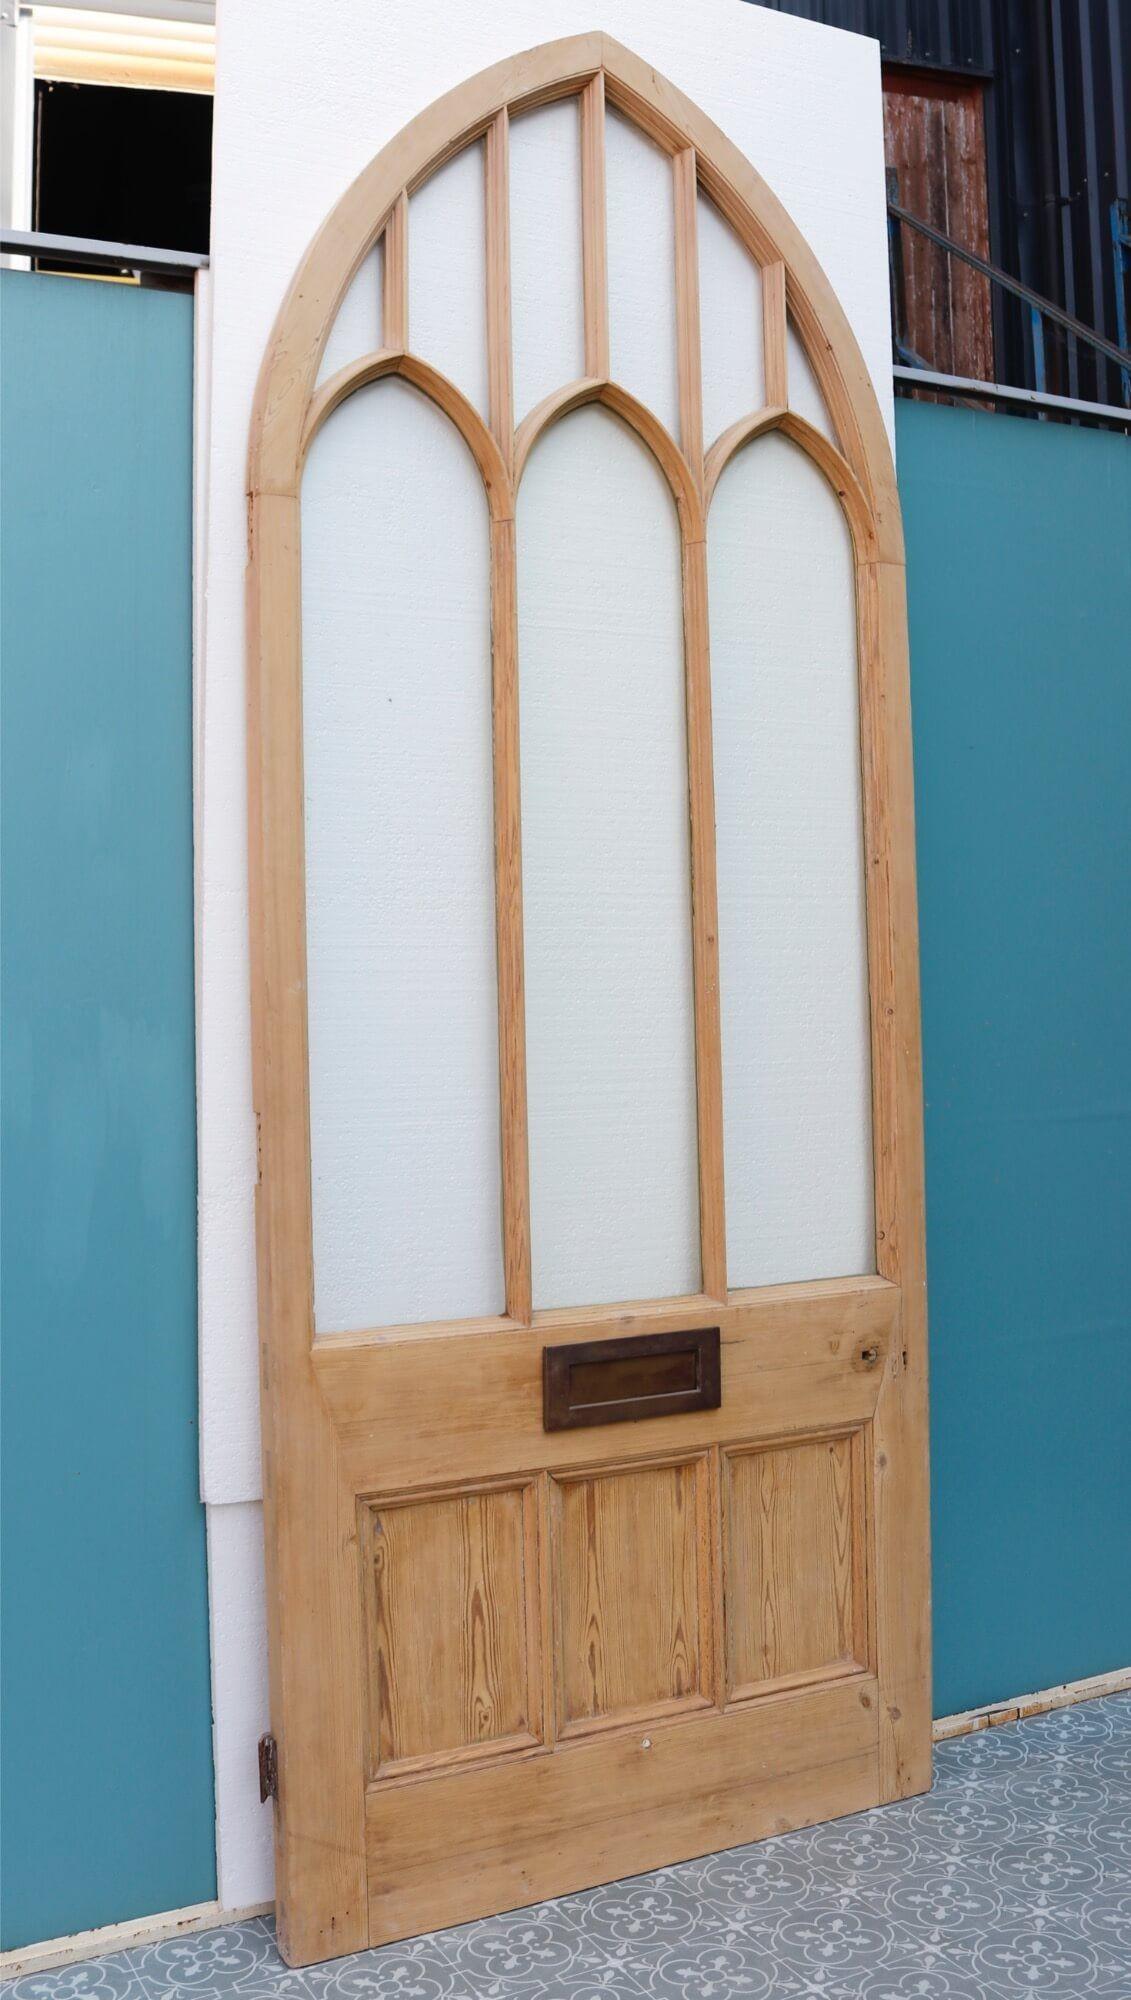 English Large Glazed Victorian Arched Door For Sale